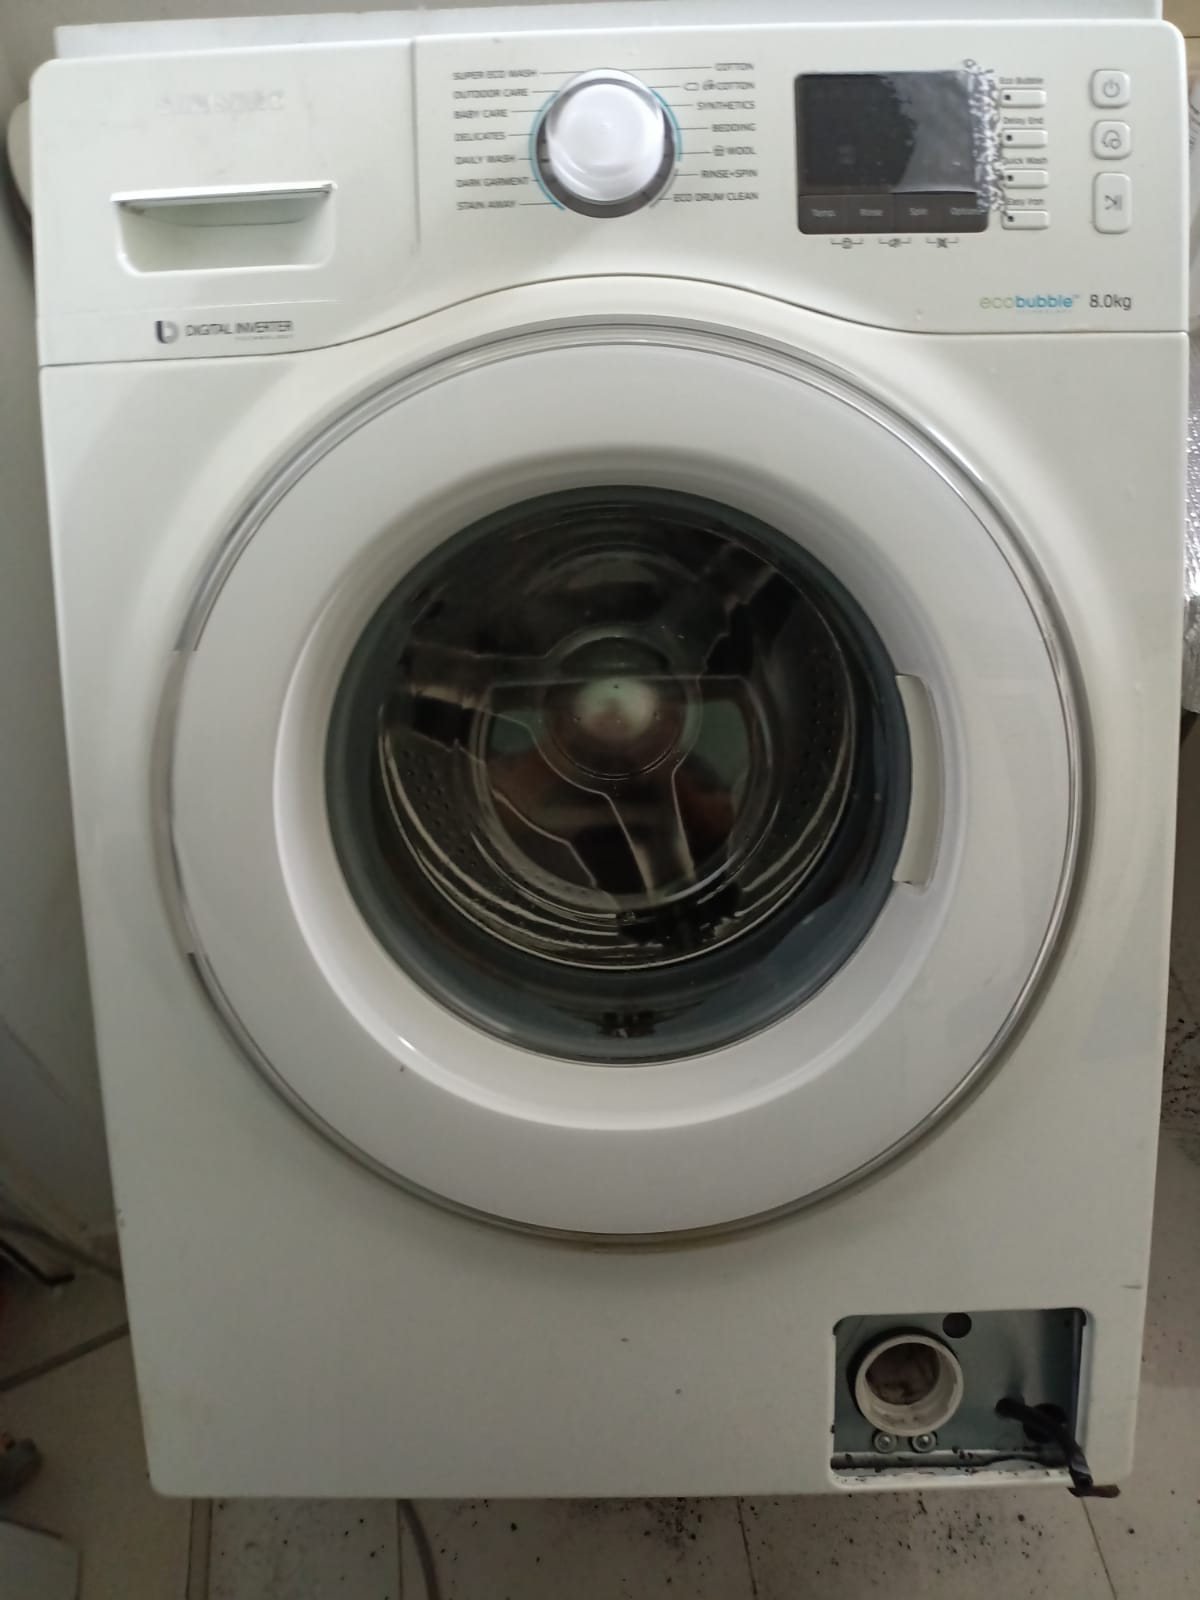 Washing Machine Checking For Filter Issue 3